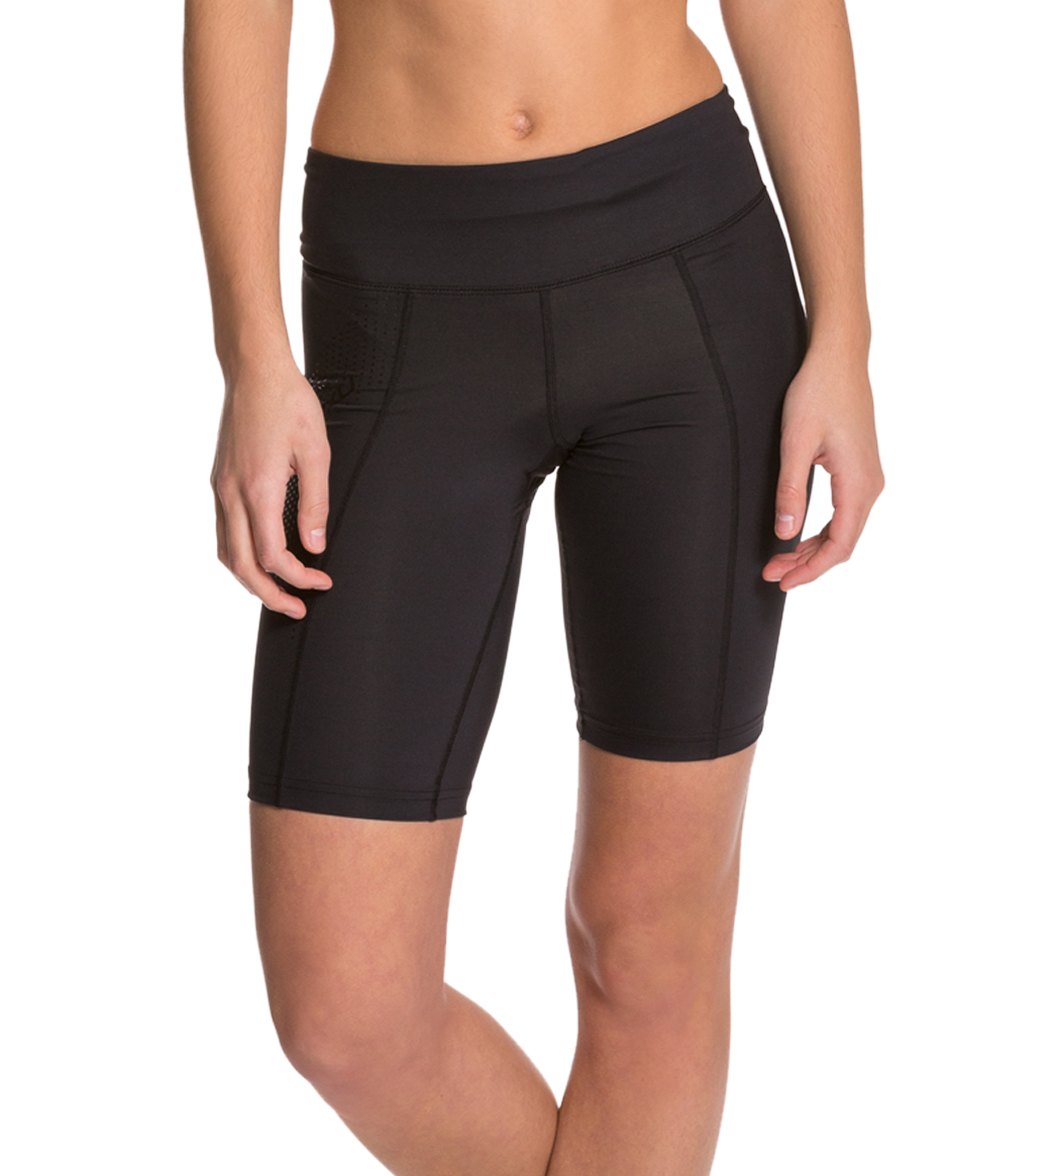 2XU Women's Mid Rise Compression Shorts at SwimOutlet.com - Free Shipping